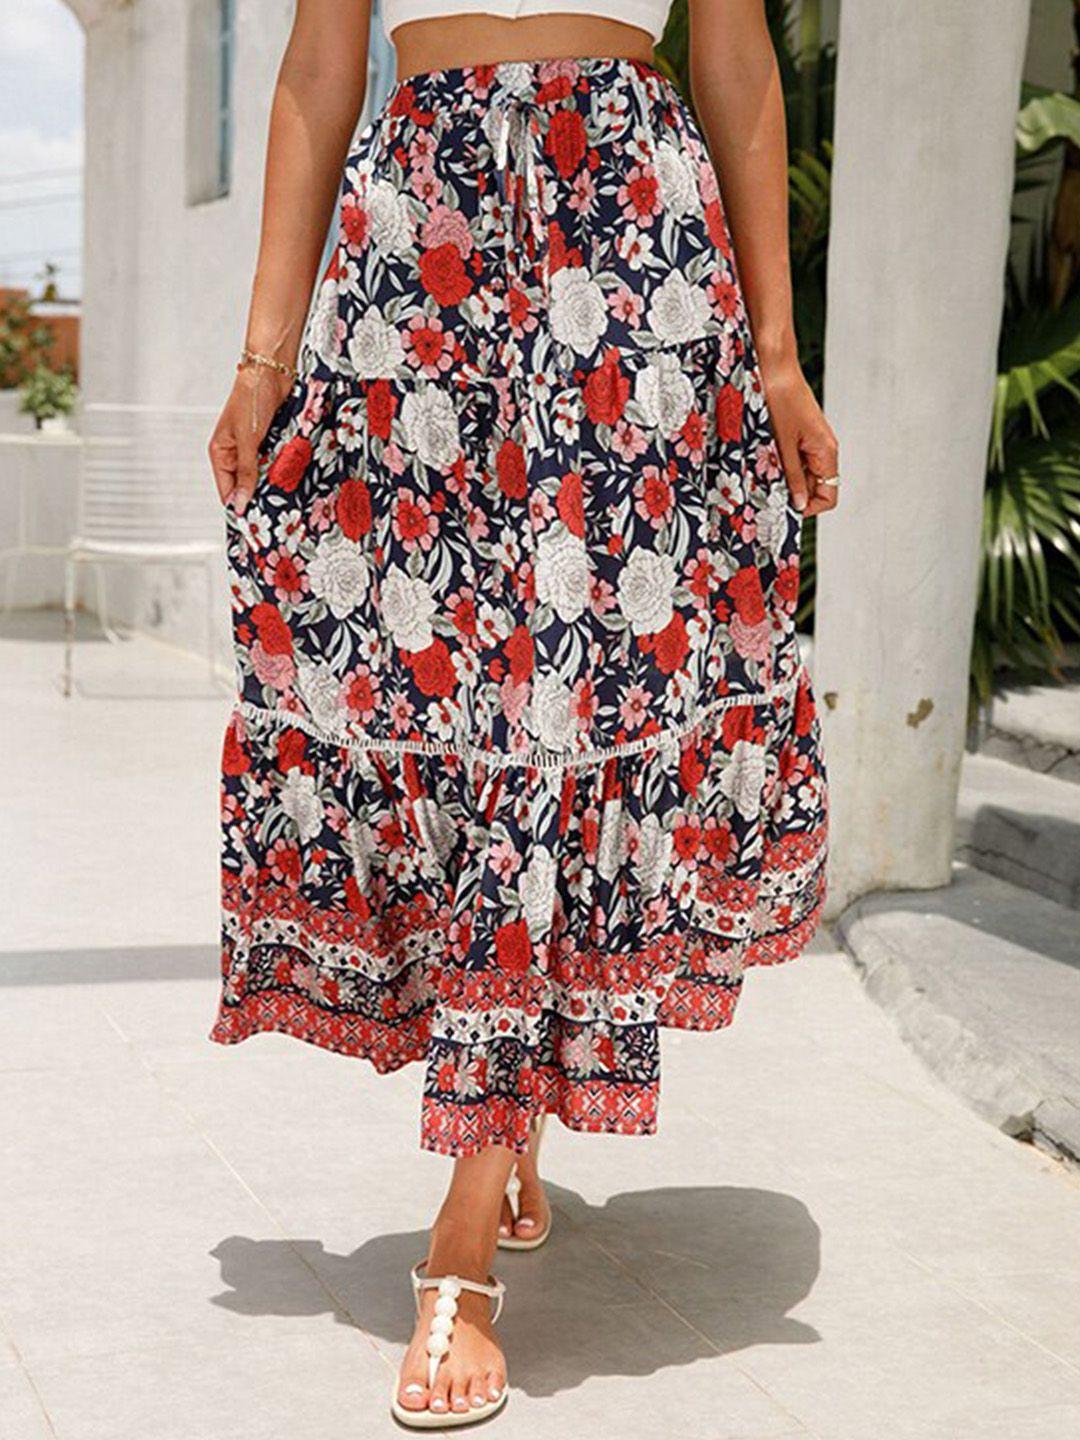 stylecast-red-floral-printed-flared-midi-skirt